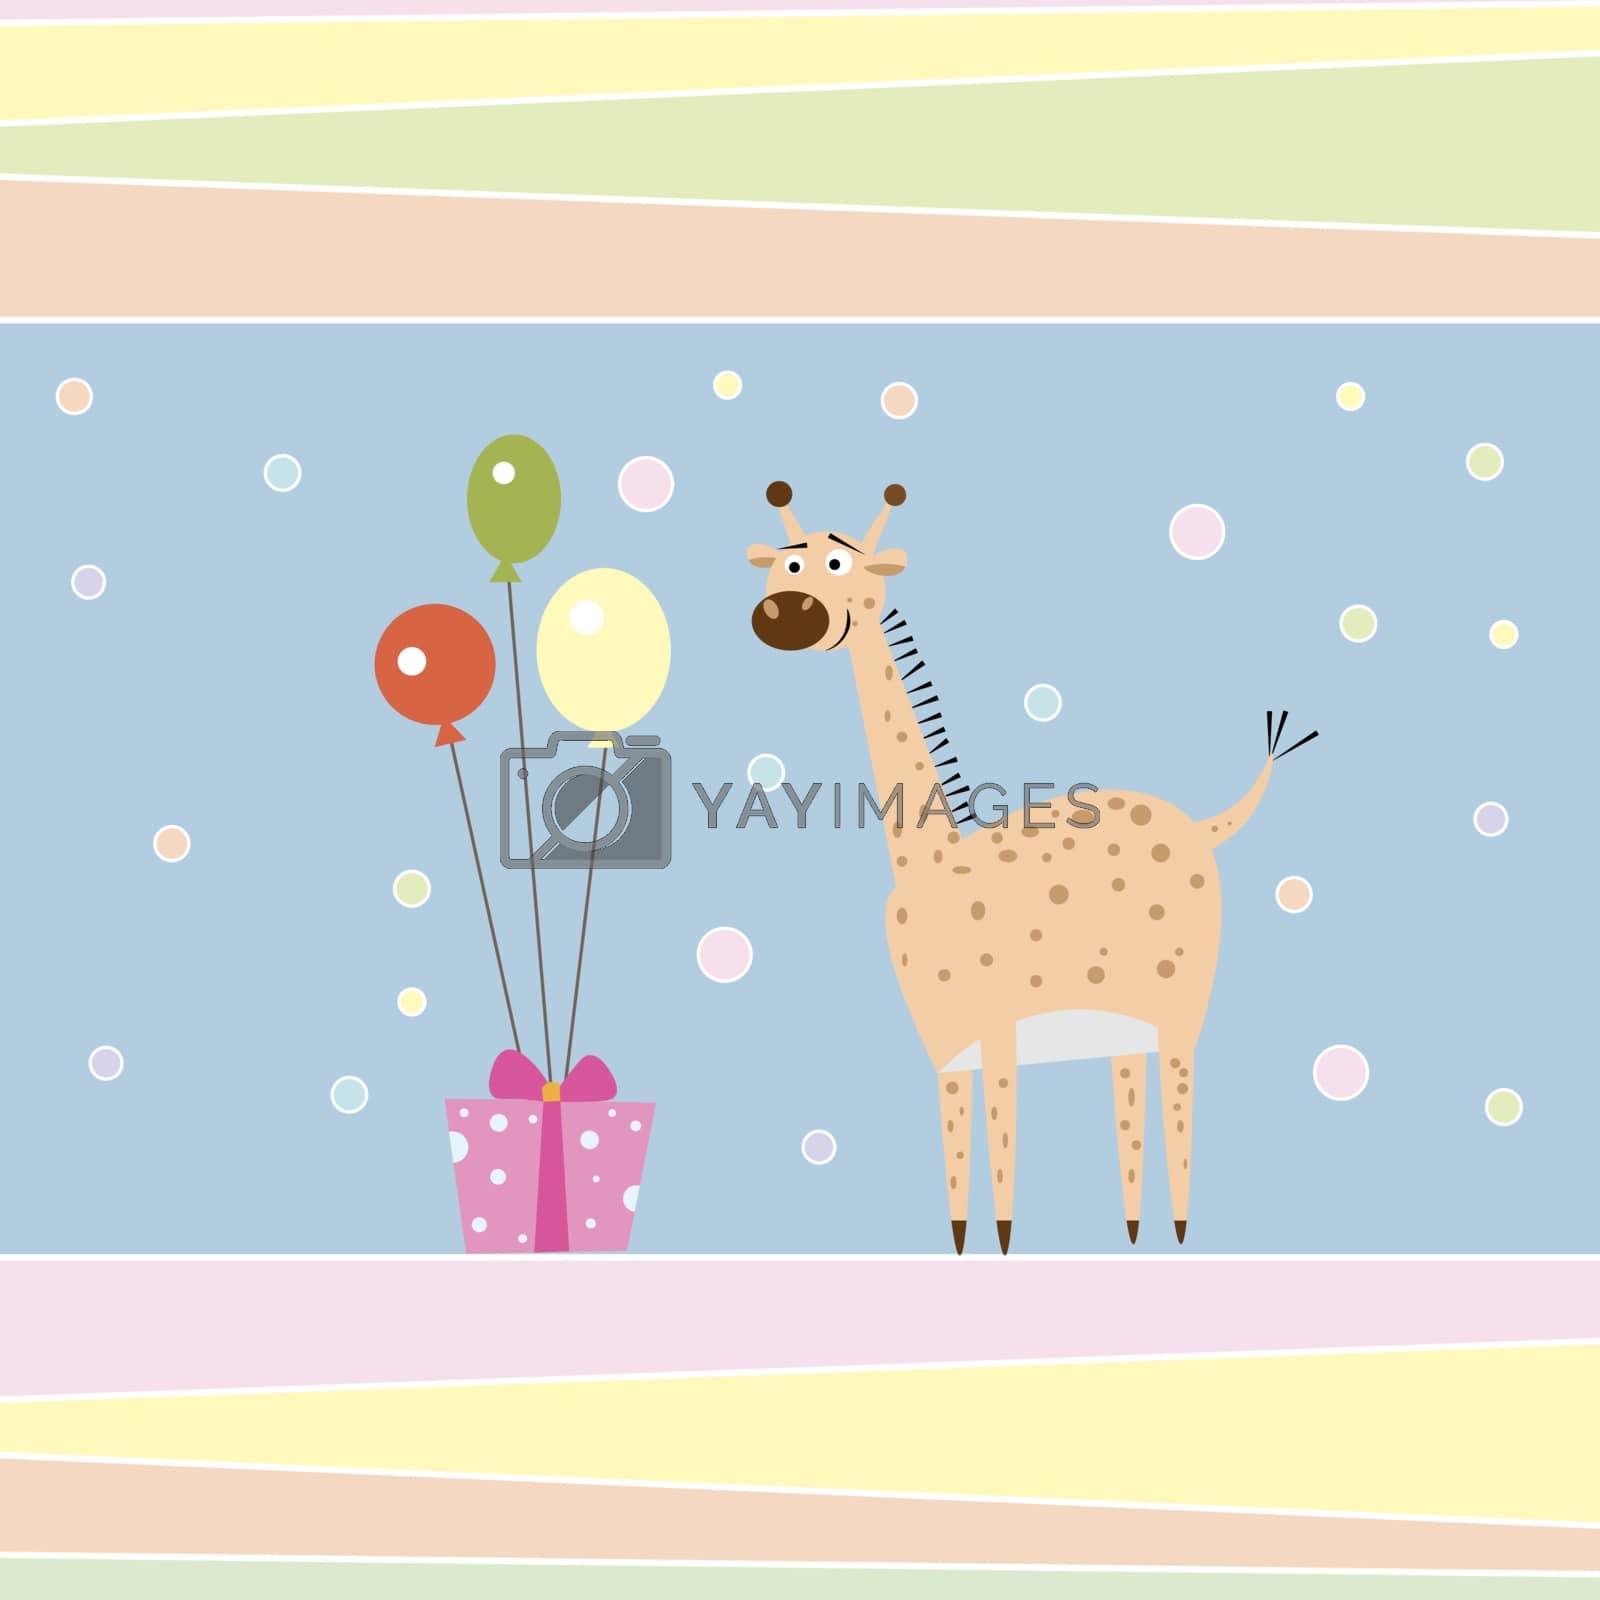 Royalty free image of funny cartoon giraffe with gift and balloons greeting card by Musjaka